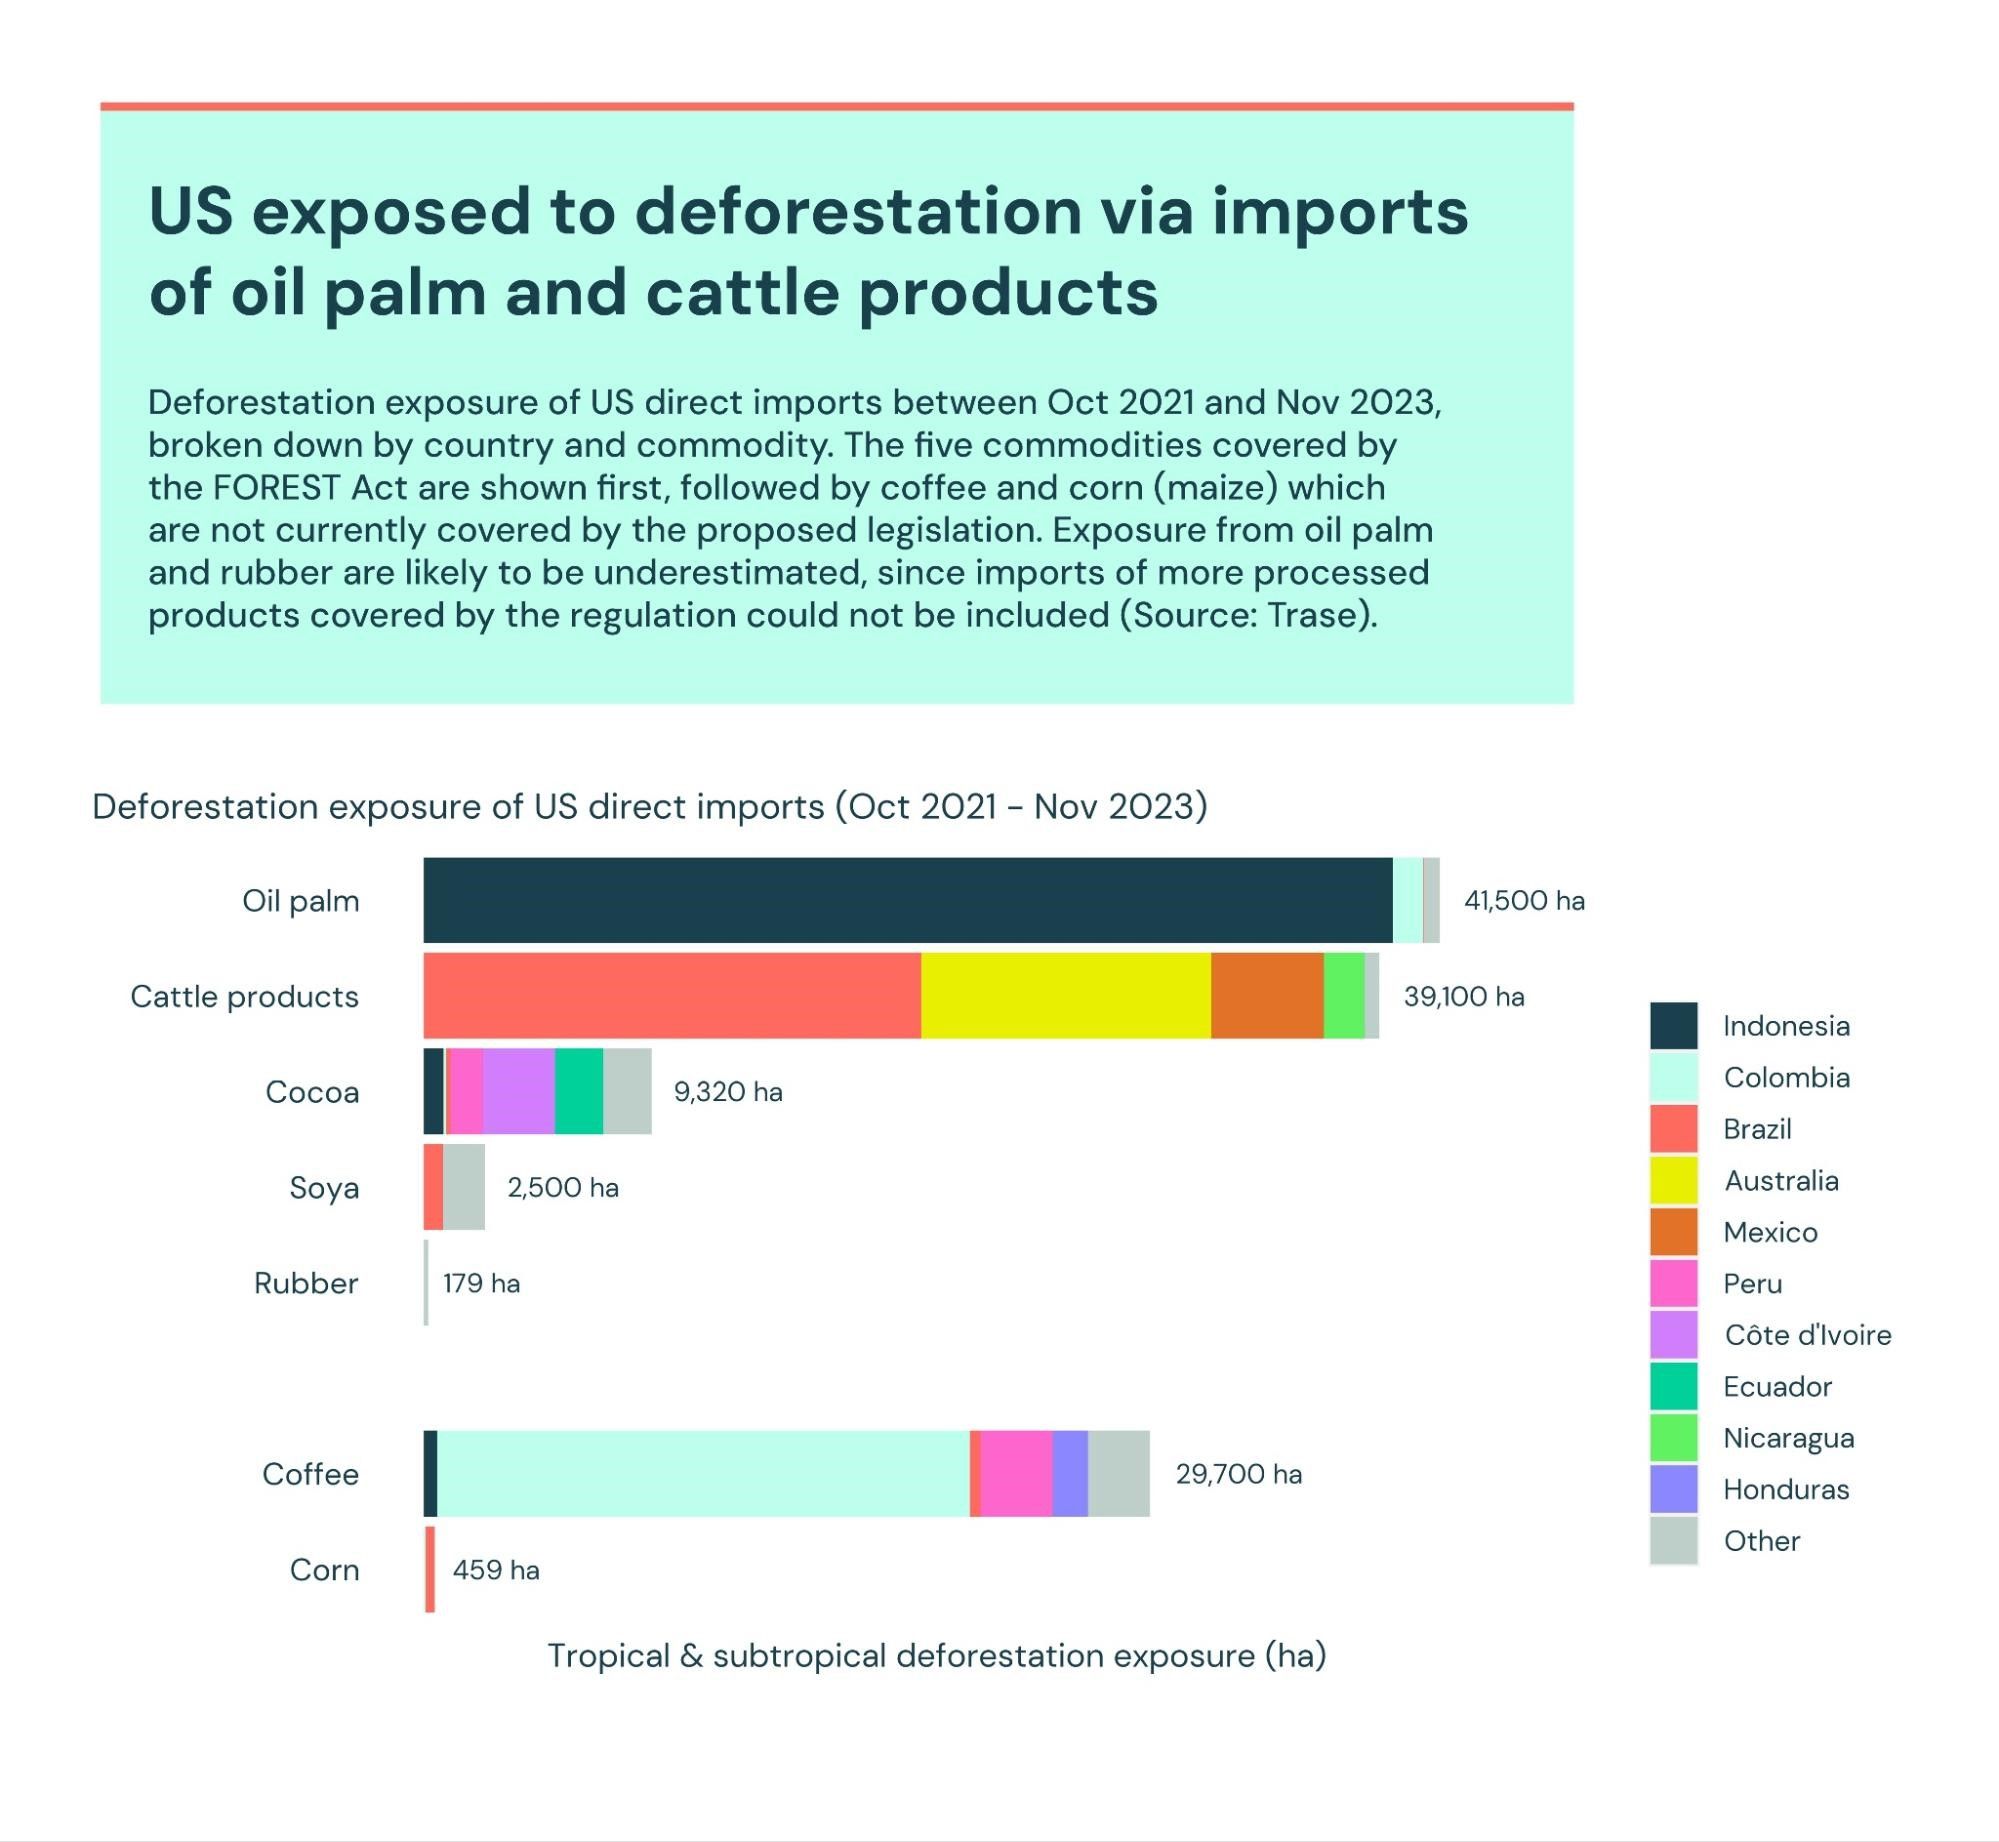 US exposed to deforestation via imports of oil palm and cattle products Deforestation exposure of US direct imports between Oct 2021 and Nov 2023, broken down by country and commodity. The five commodities covered by the FOREST Act are shown first, followed by coffee and corn (maize) which are not currently covered by the proposed legislation. Exposure from oil palm and rubber are likely to be underestimated, since imports of more processed products covered by the regulation could not be included (Source: Trase).